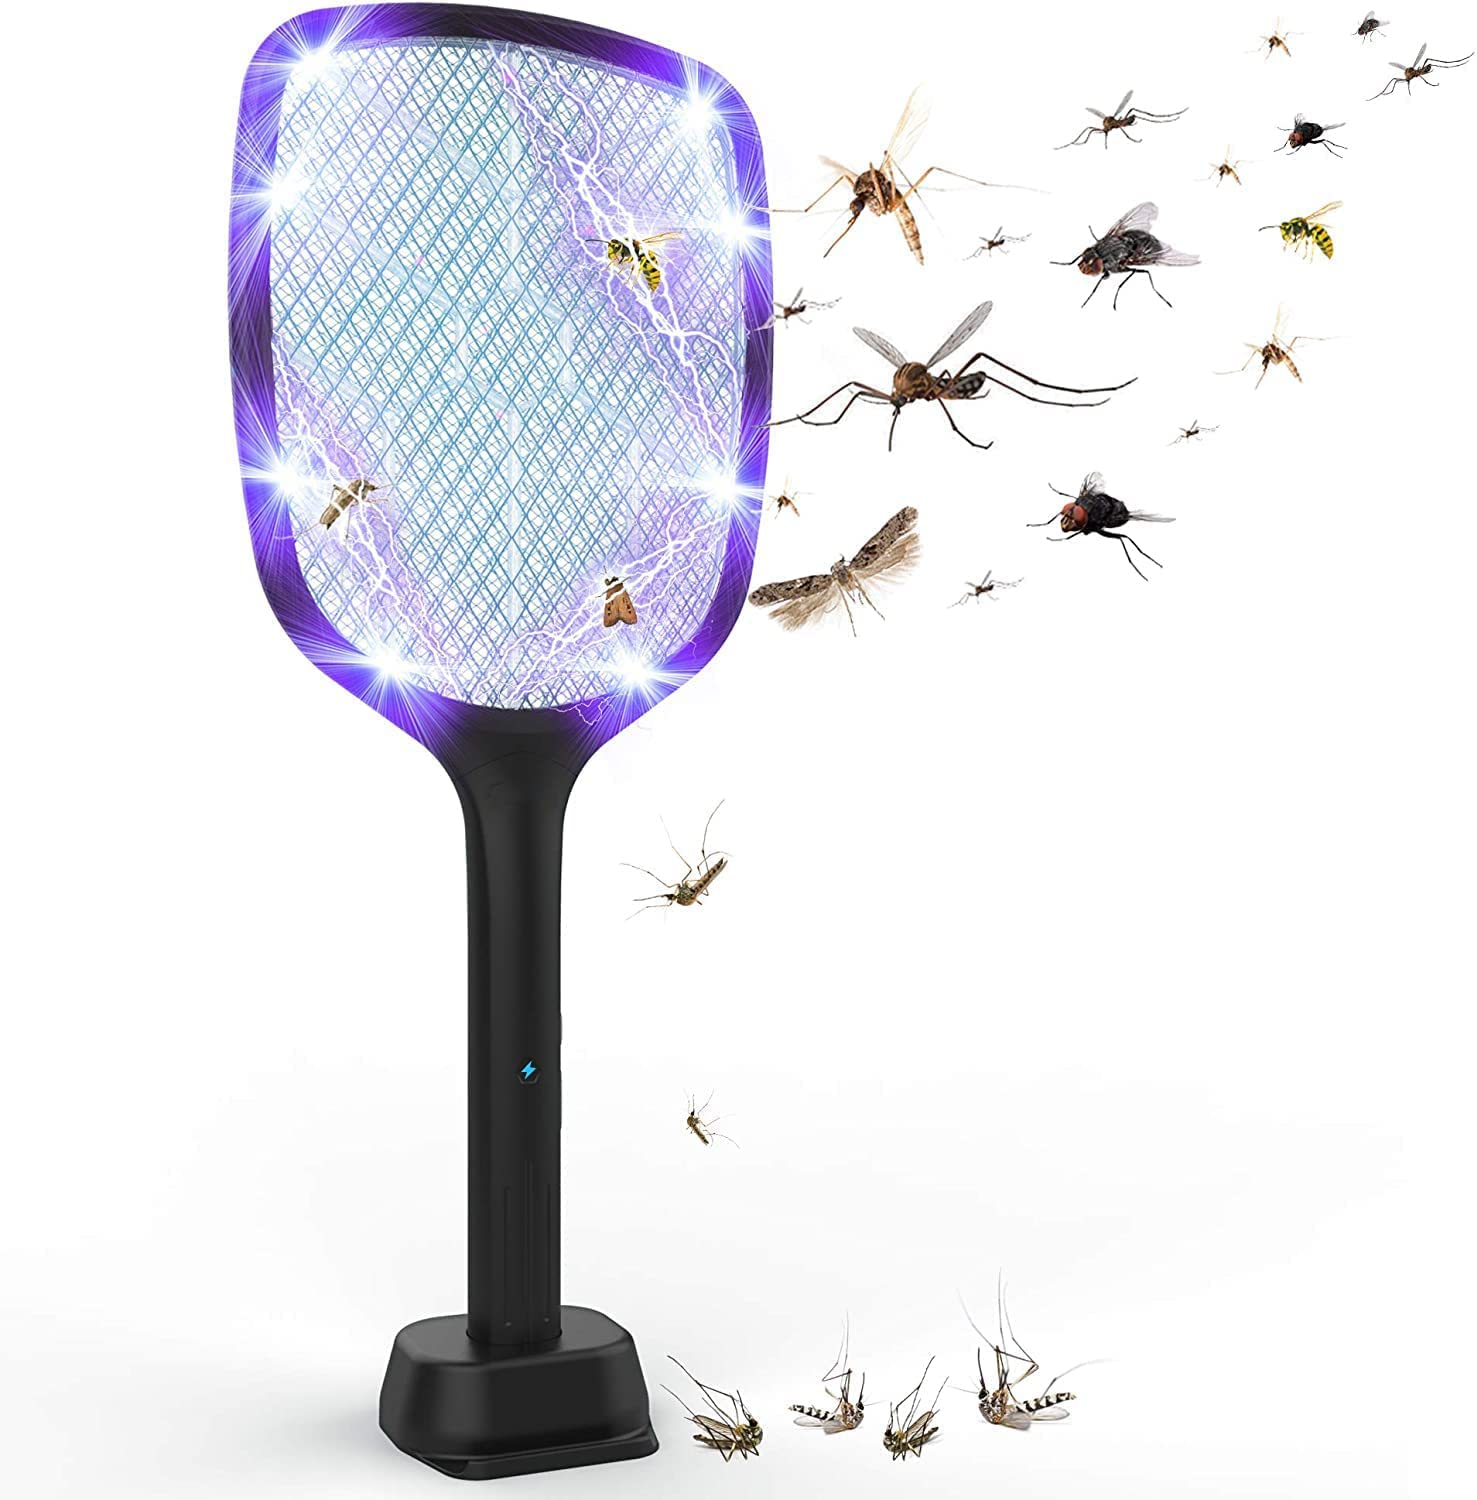 effective mosquito control using led lamps